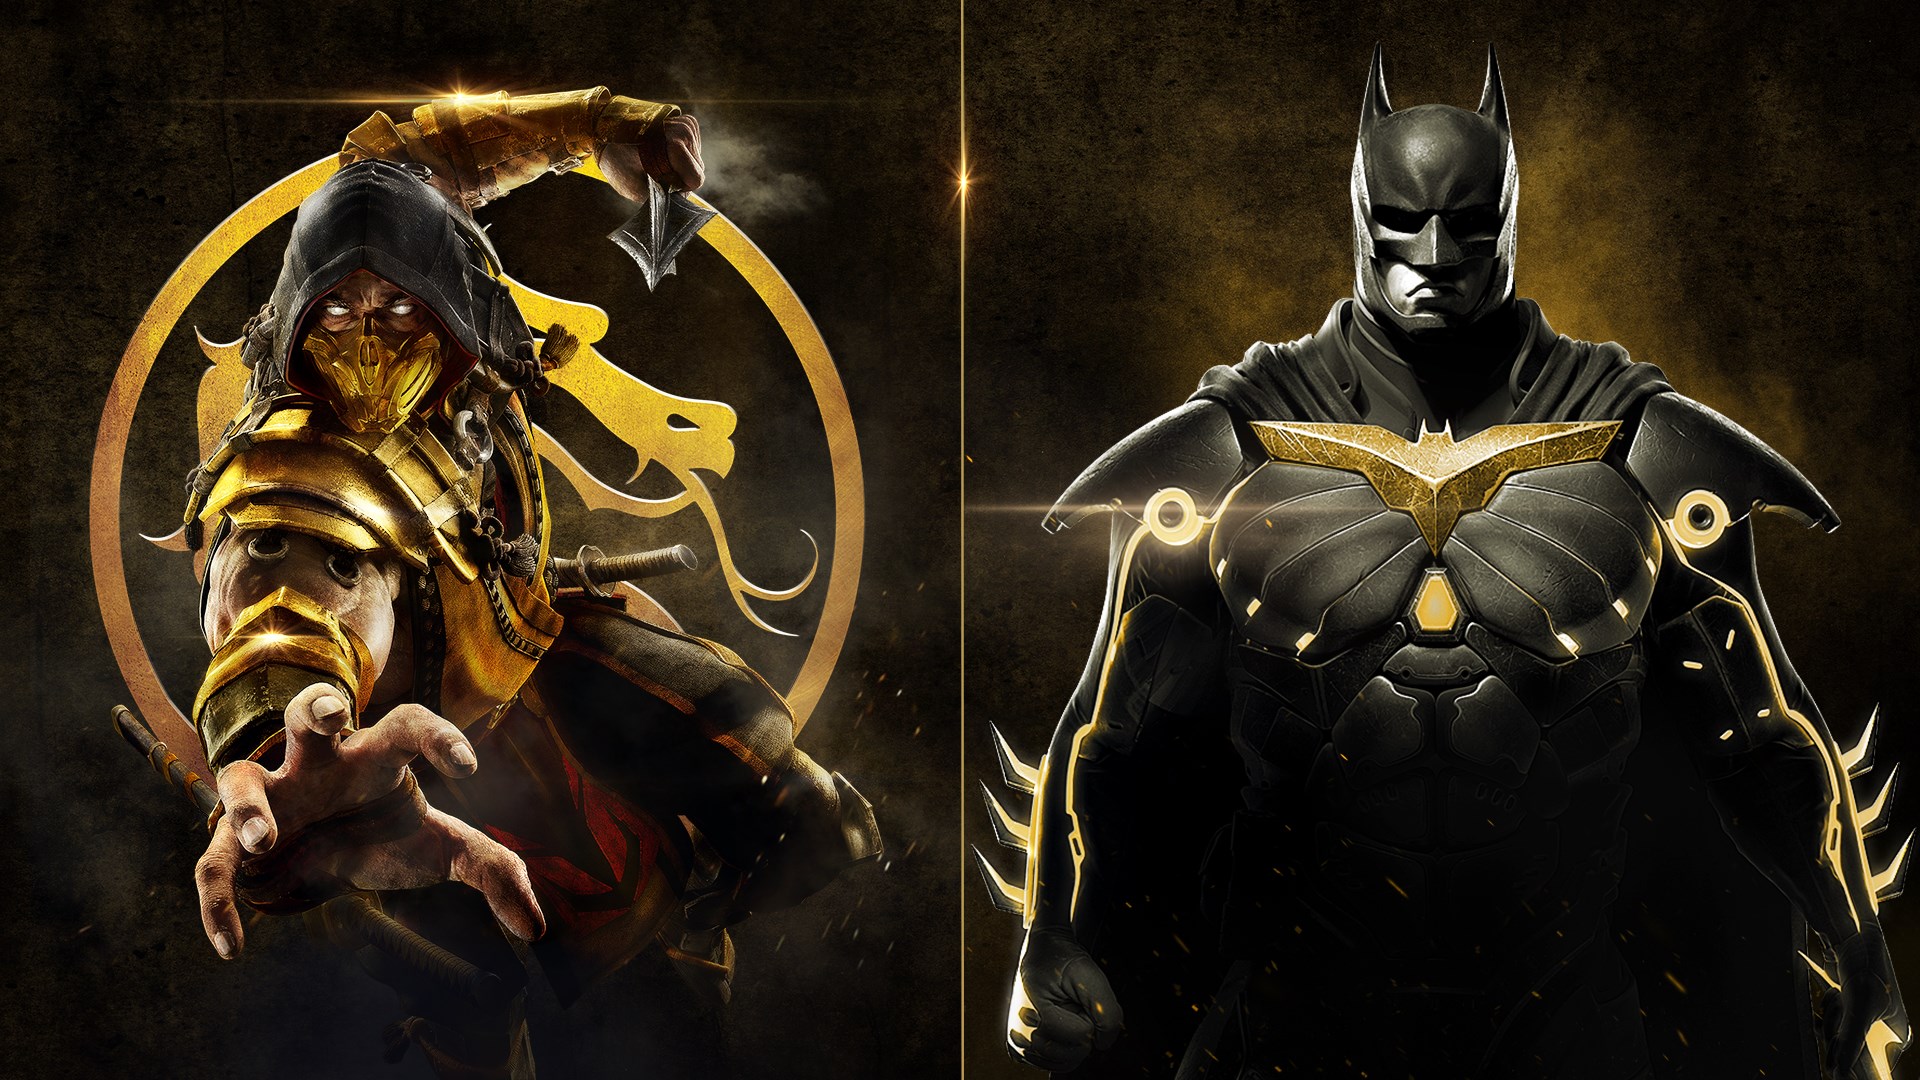 Mortal Kombat 11 PE + Injustice 2 LE - Premier Fighter Is Now Available For  Xbox One - Xbox Wire